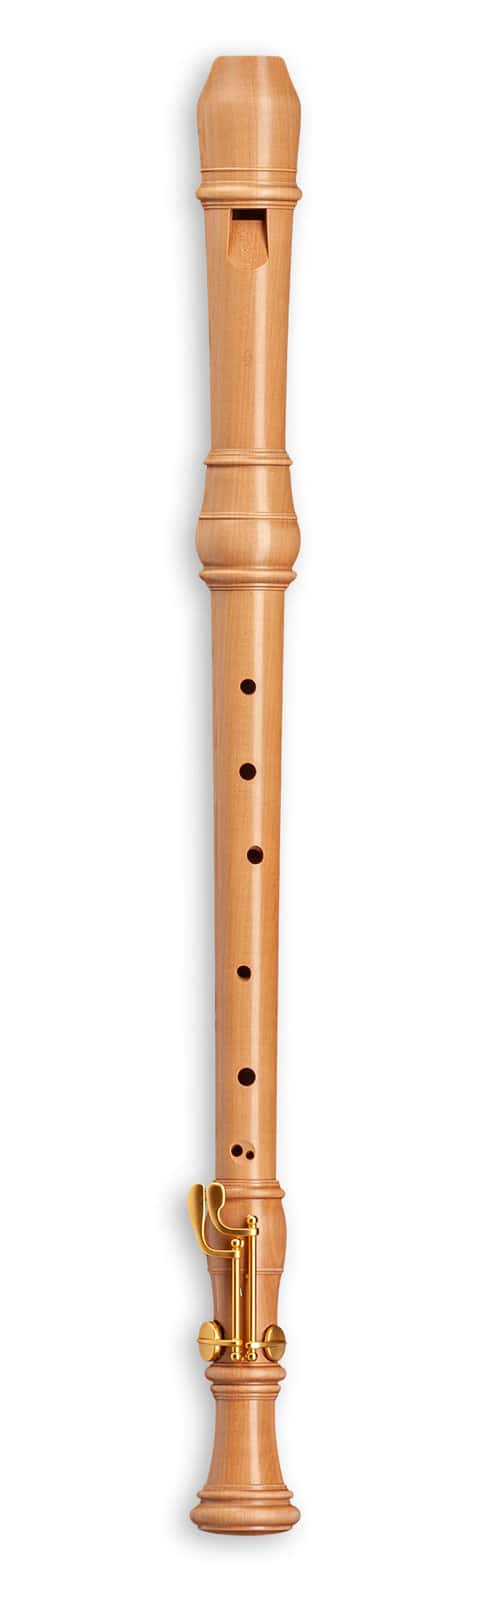 MOLLENHAUER DENNER TENOR WITH DOUBLE KEY 5416